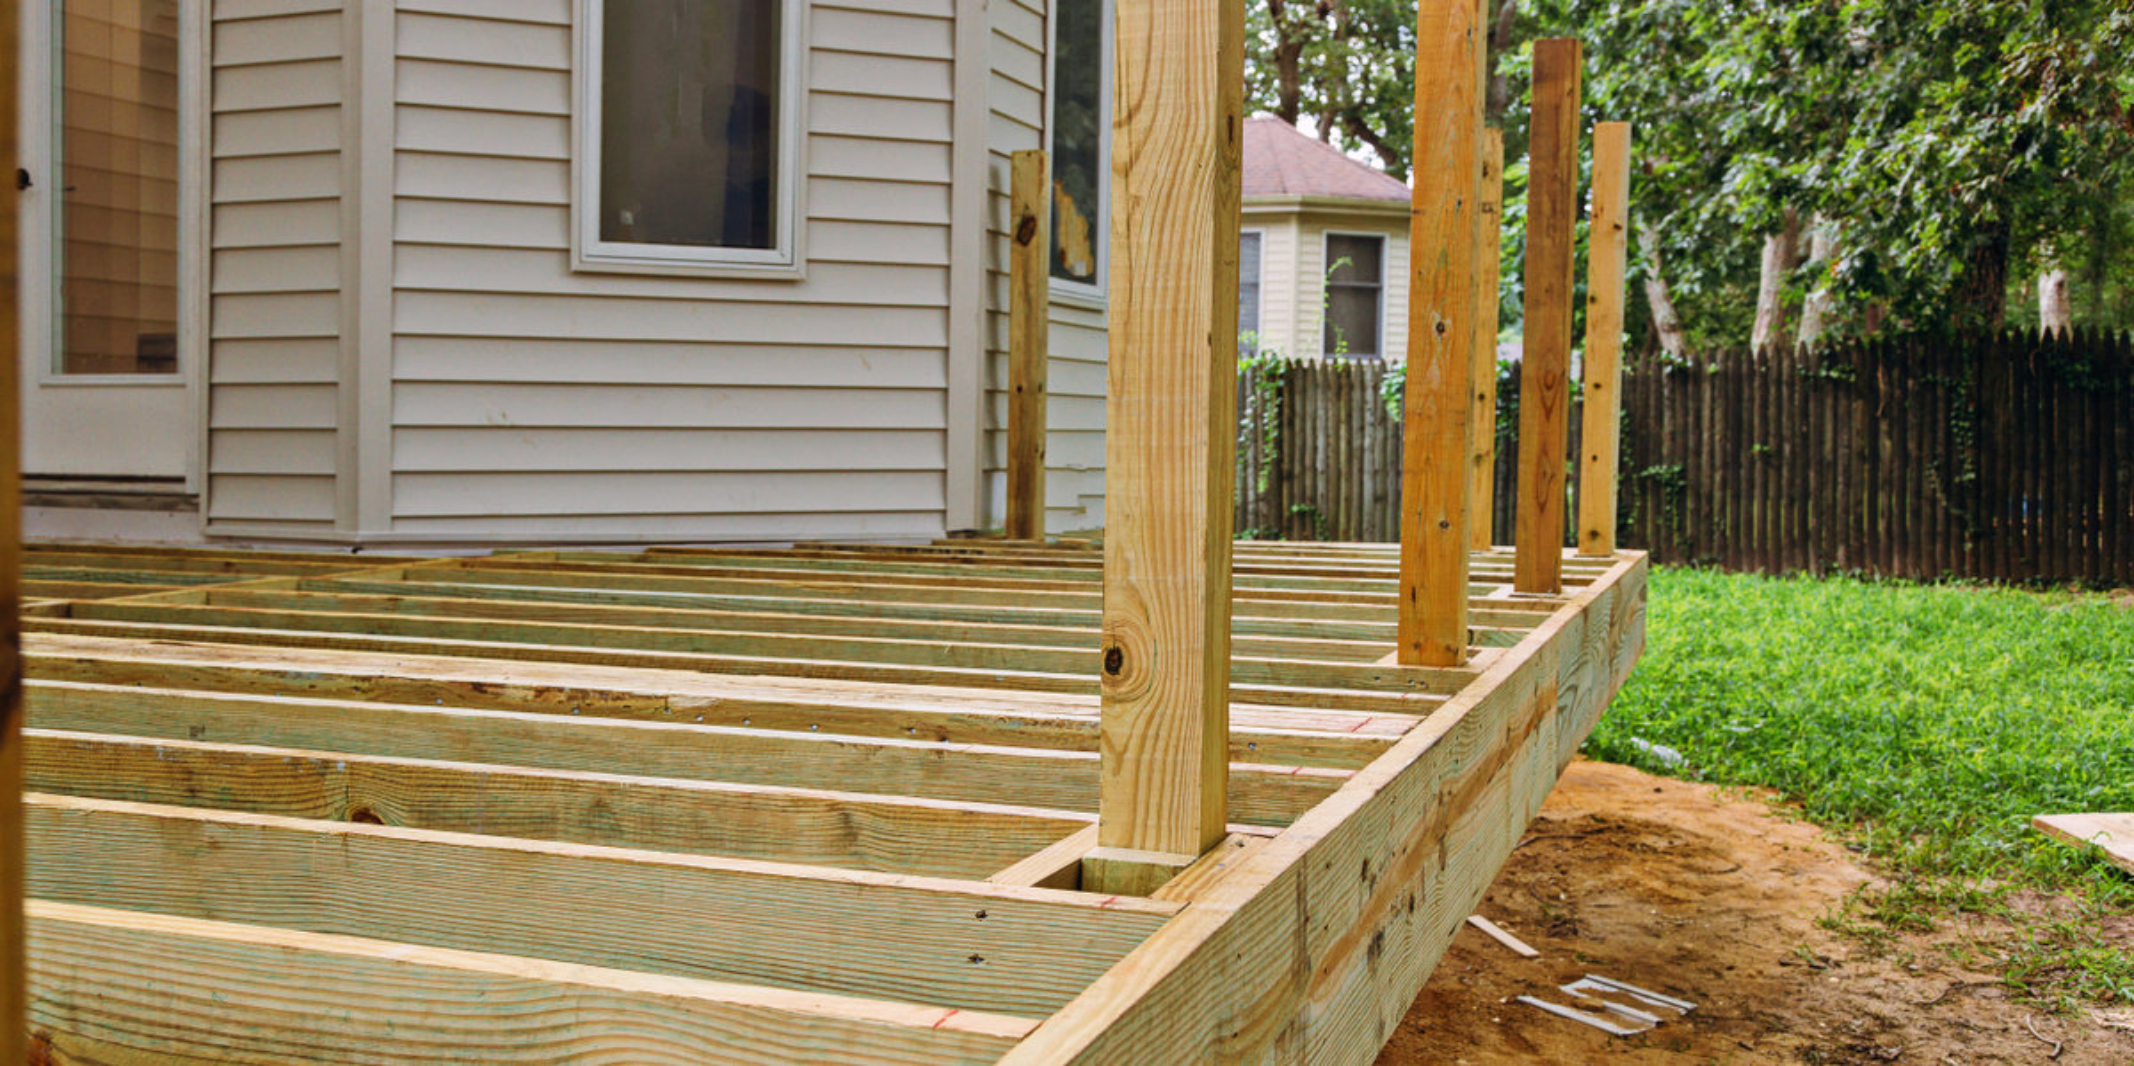 The exposed structure of a porch that is having its rail and boards replaced during an appointment for porch repair.